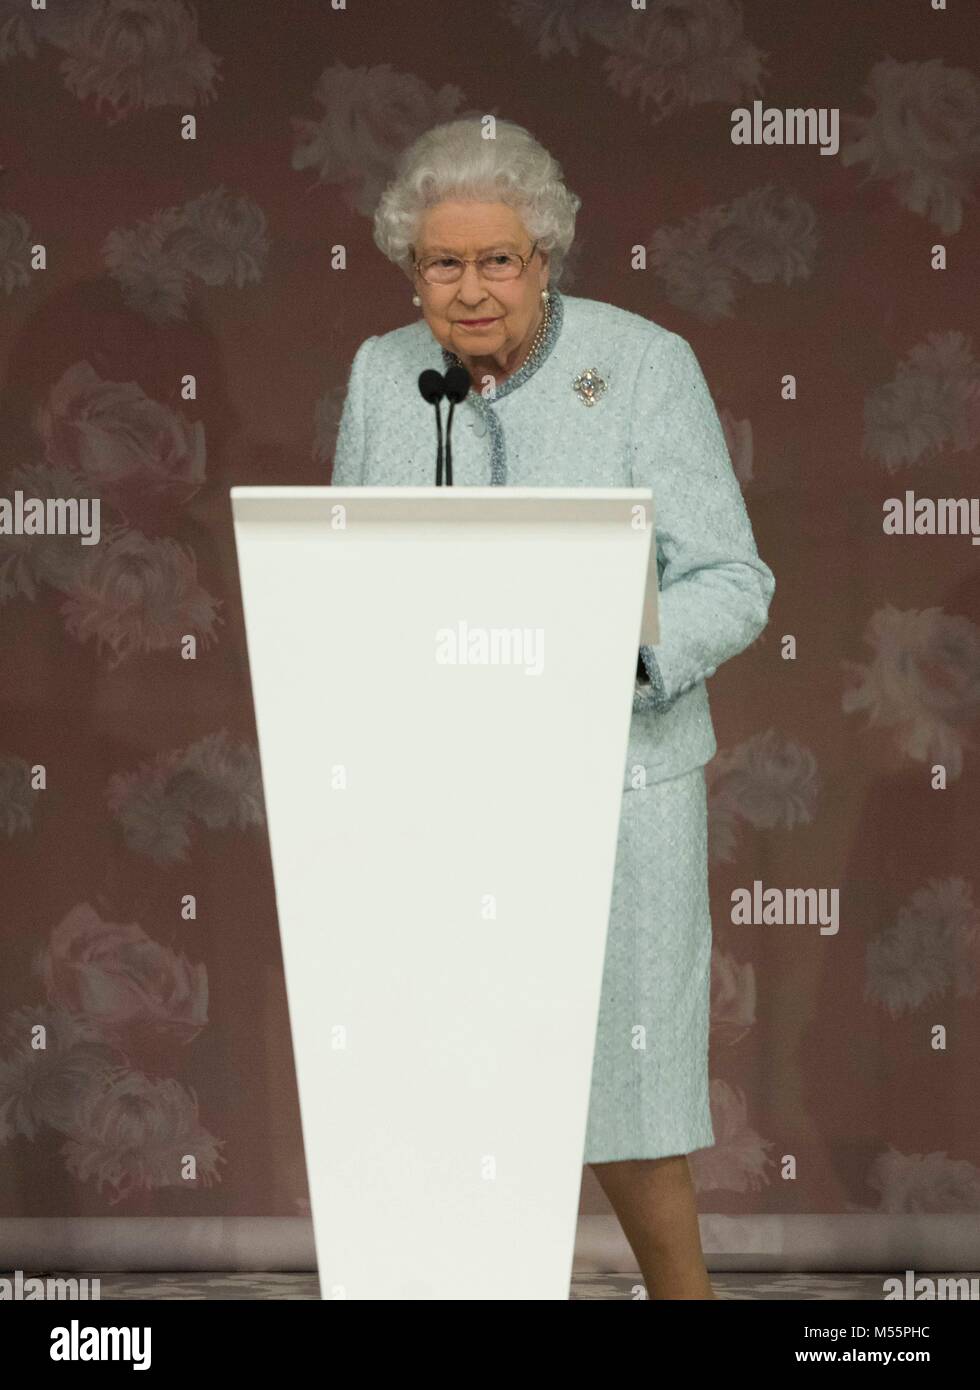 London, UK. 20th February, 2018. Her Majesty The Queen at Richard Quinn Fashion show during London Fashion Week February 2018 - Autumn/Winter 2018. London, UK 20/02/2018 | usage worldwide Credit: dpa picture alliance/Alamy Live News Stock Photo